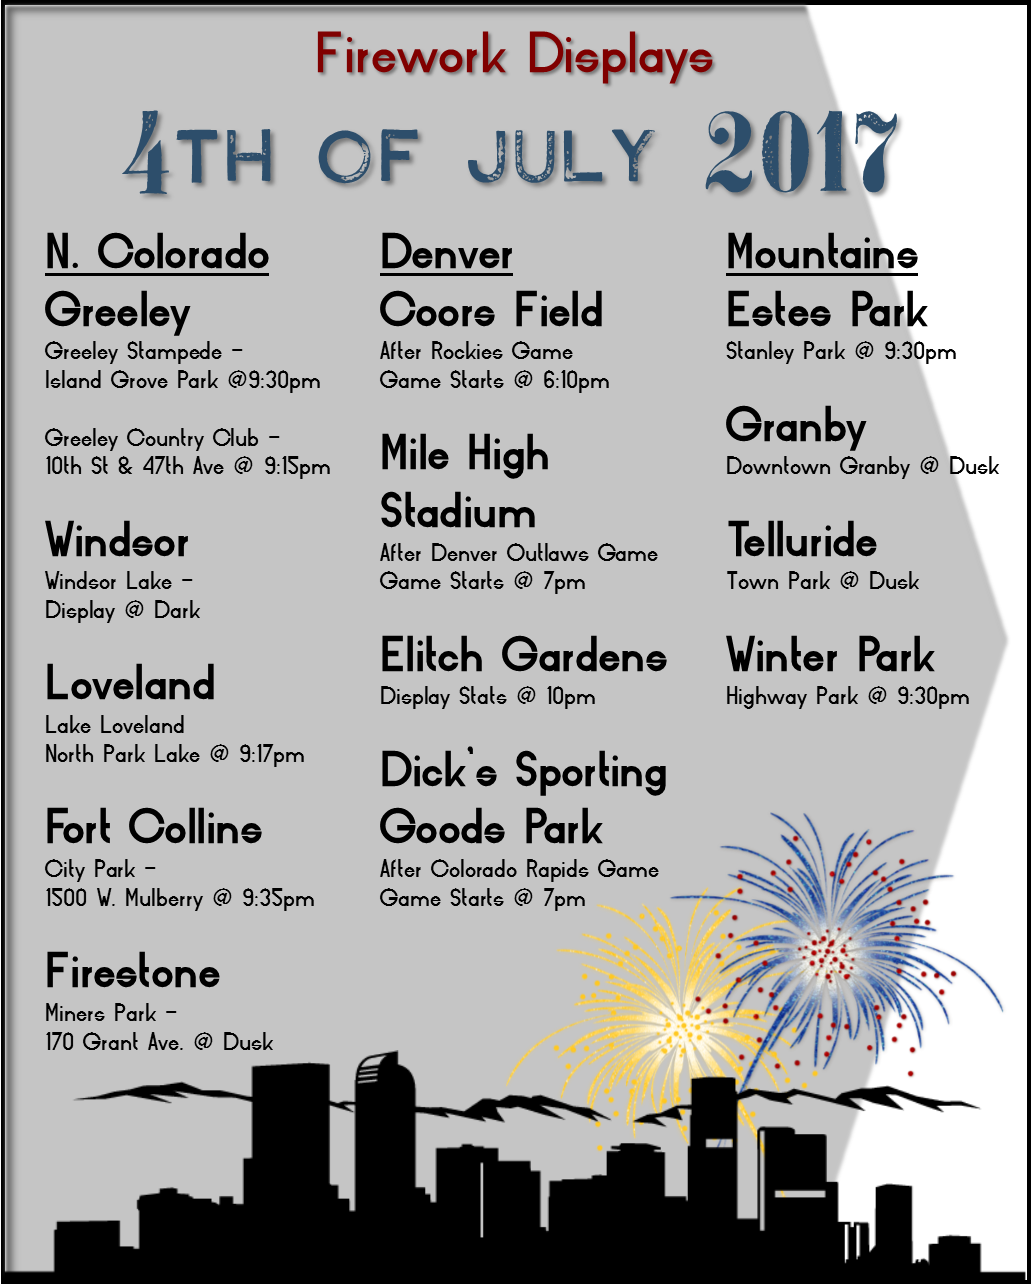 Firework Displays for 4th of July in Northern Colorado